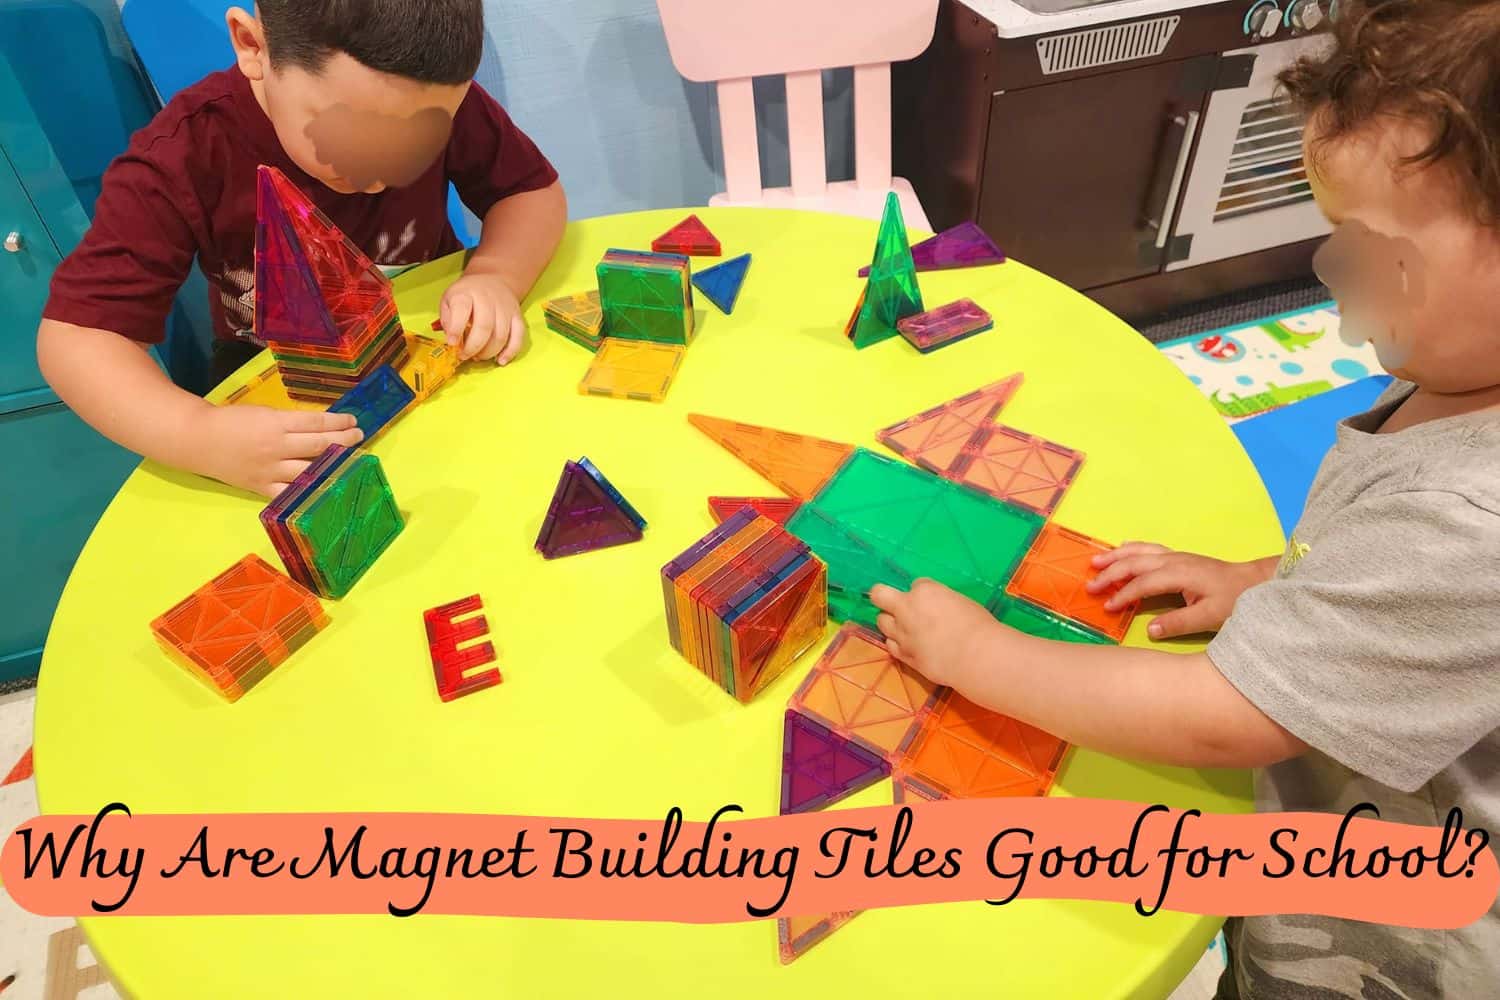 Why Are Magnet Building Tiles Good for School?